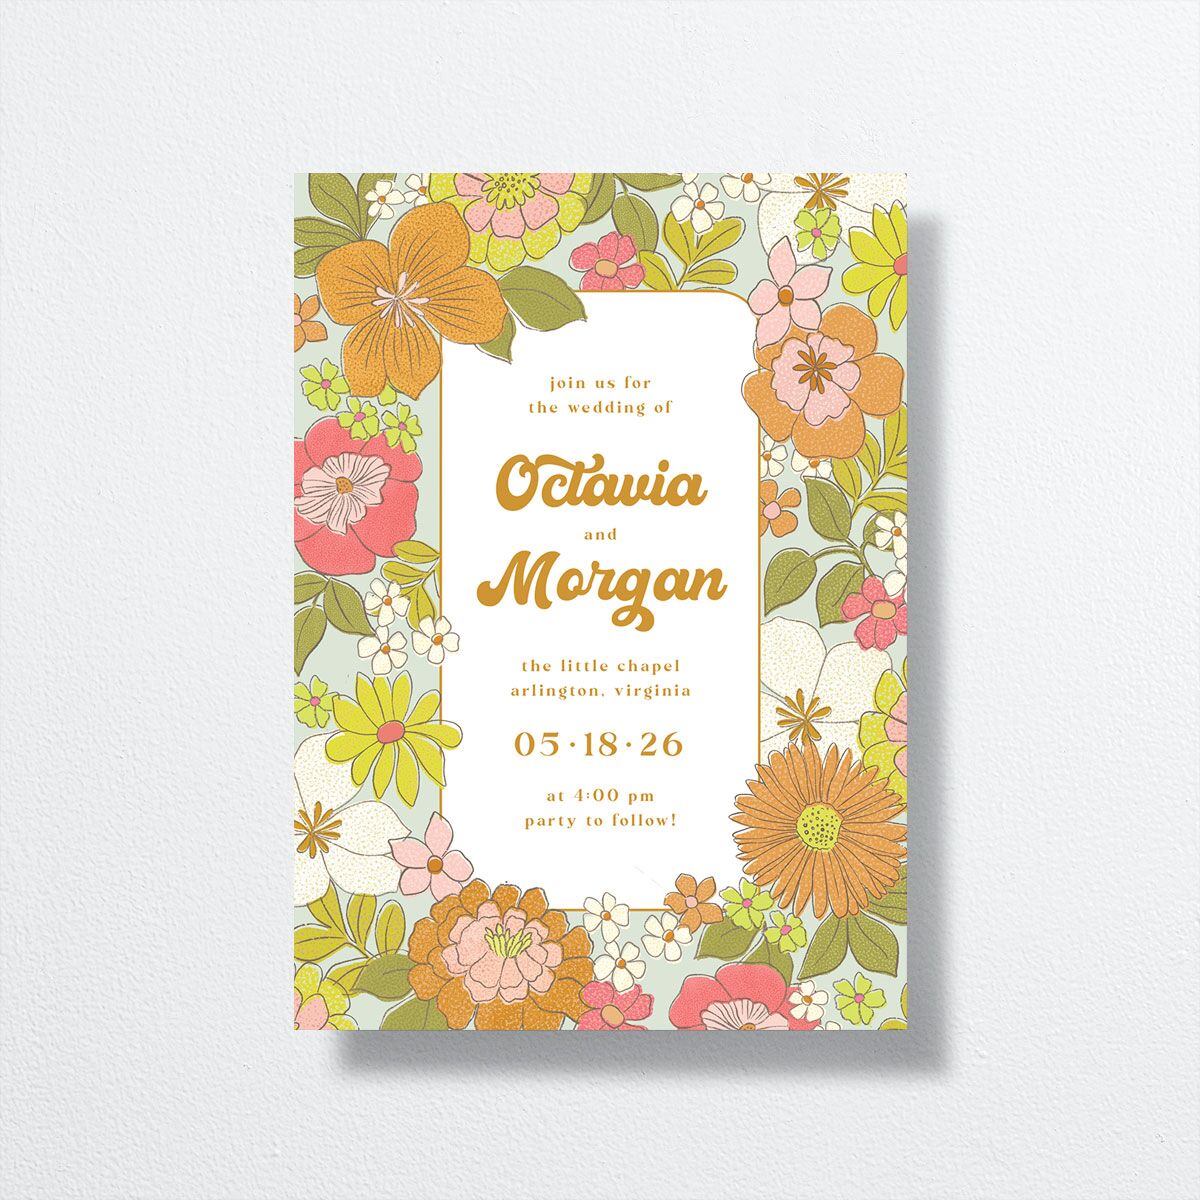 Groovy Blooms Wedding Invitations front in yellow